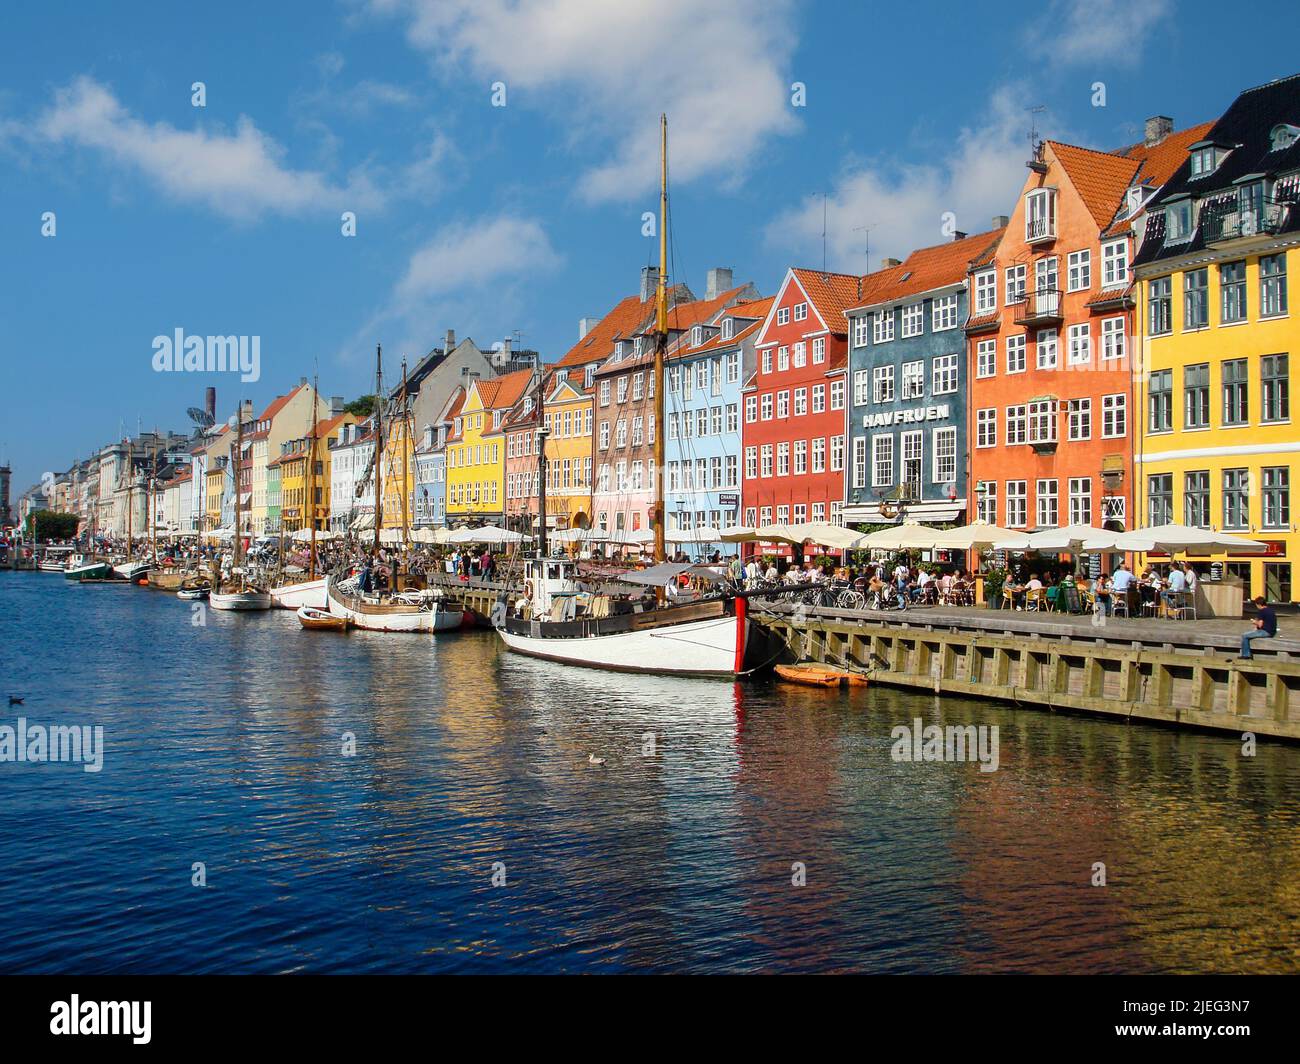 Nyhavn (New Harbor), a waterfront, canal and entertainment district, lined by brightly coloured 17th and early 18th century townhouses. Stock Photo